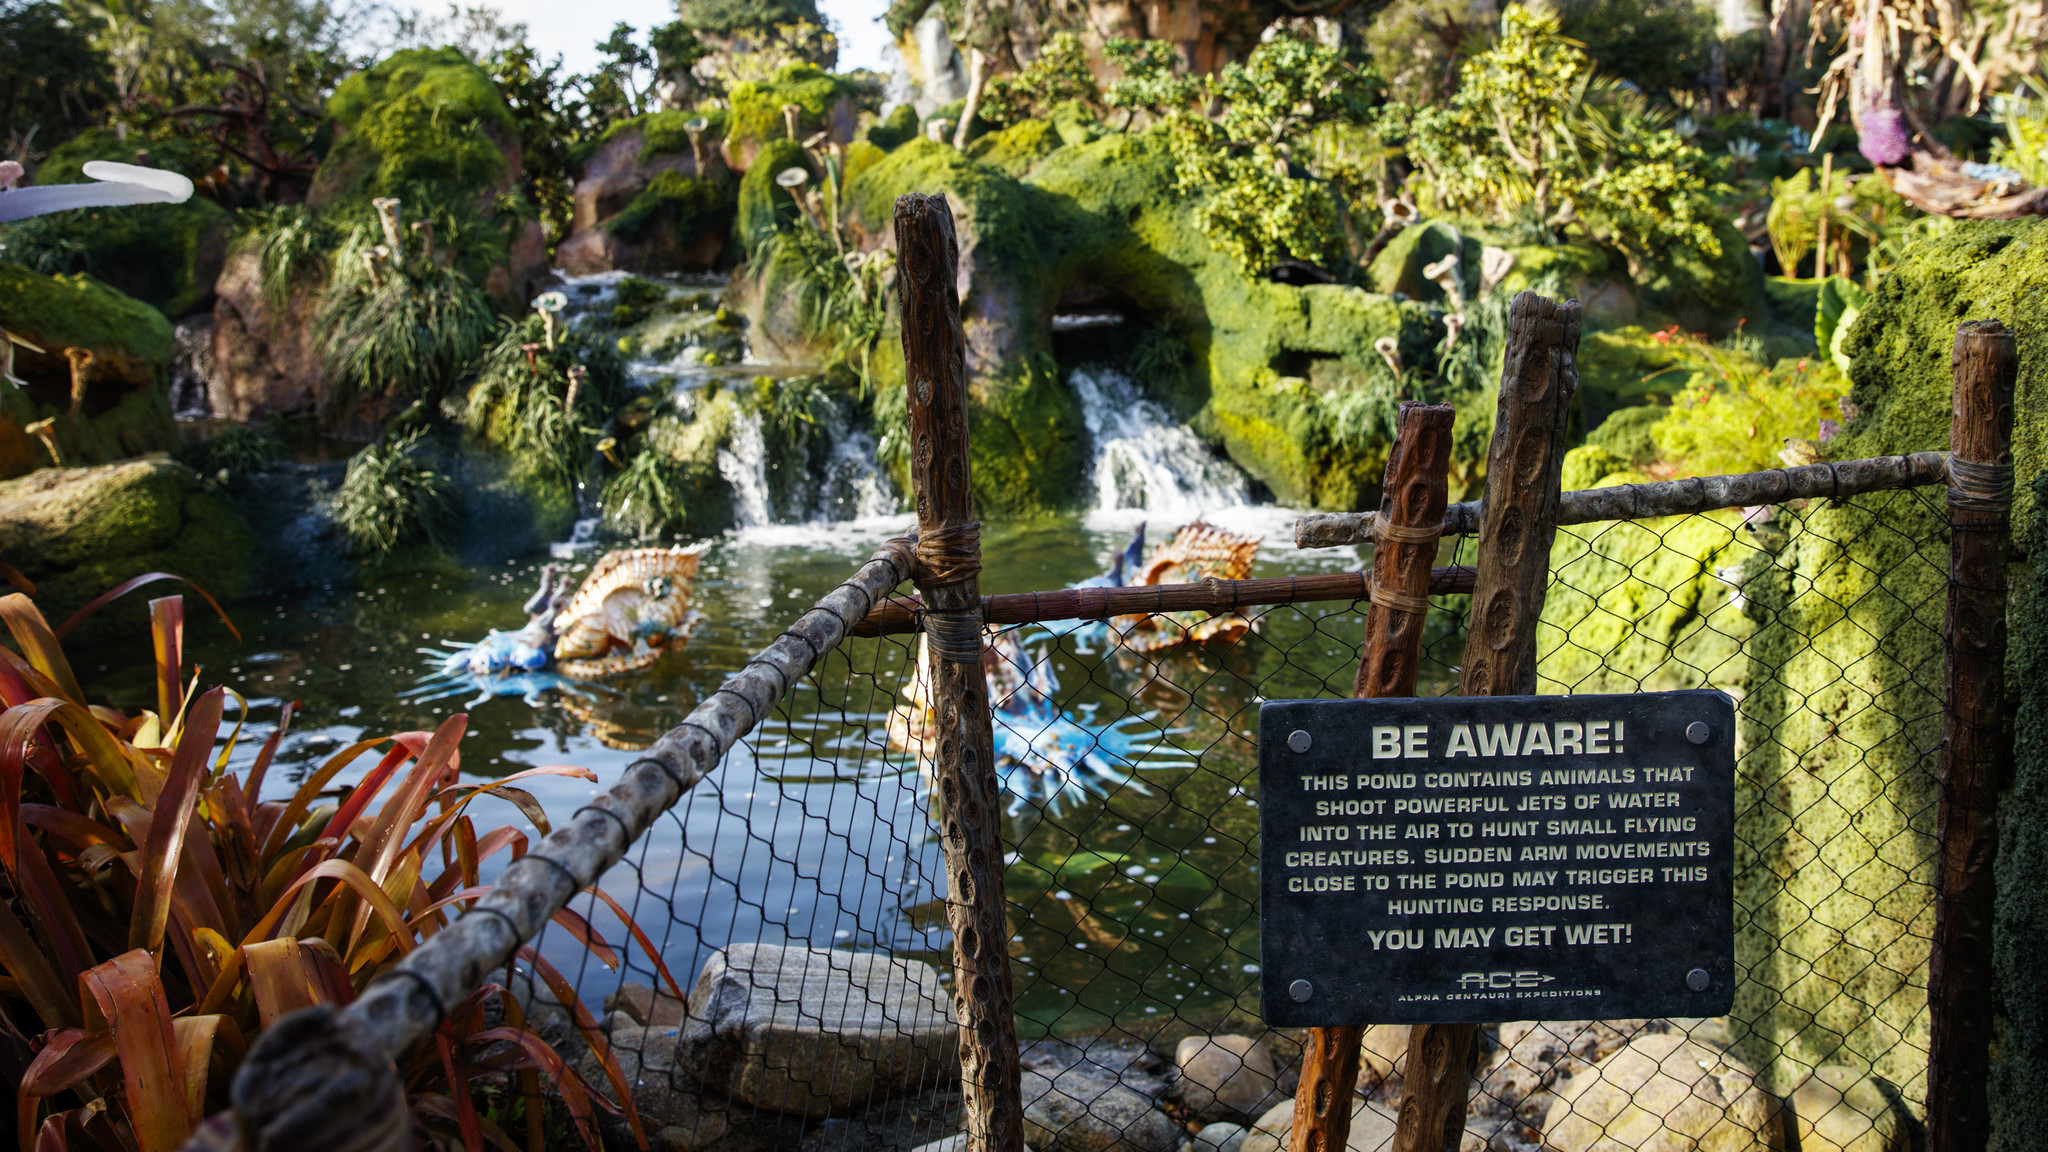 A look at some of the Pandora creatures in one of the land's ponds.